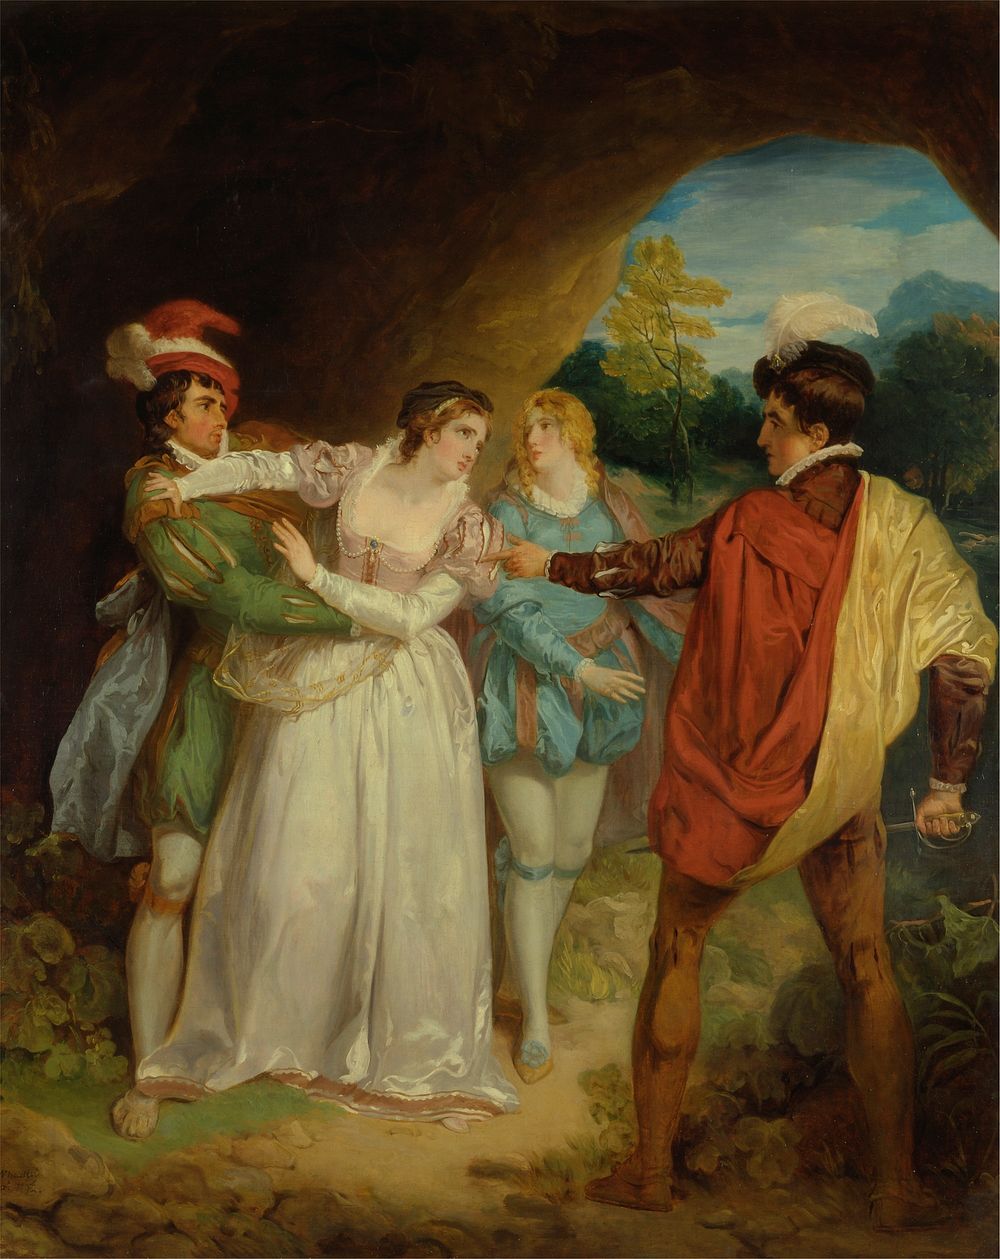 Valentine rescuing Silvia from Proteus, from Shakespeare's "The Two Gentlemen of Verona," Act V, Scene 4, the Outlaws' Cave